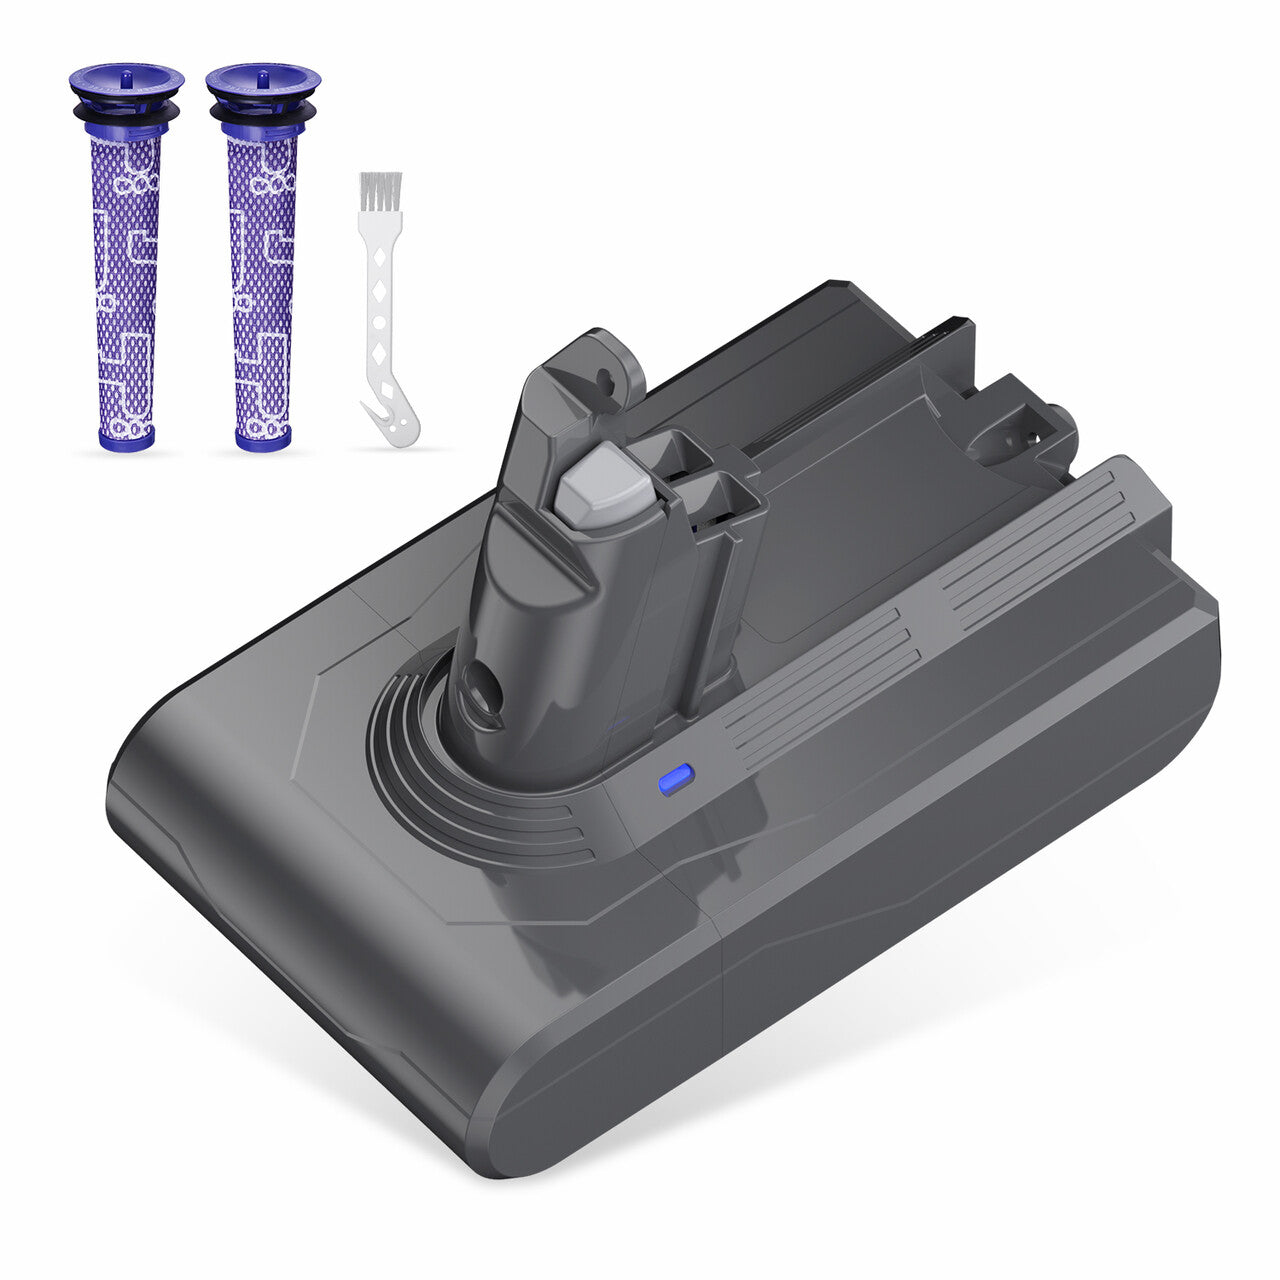 Upgrade Dyson V6 Replacement Battery 3.5Ah 21.6V with 2Pcs Filters & 1Pc Brush